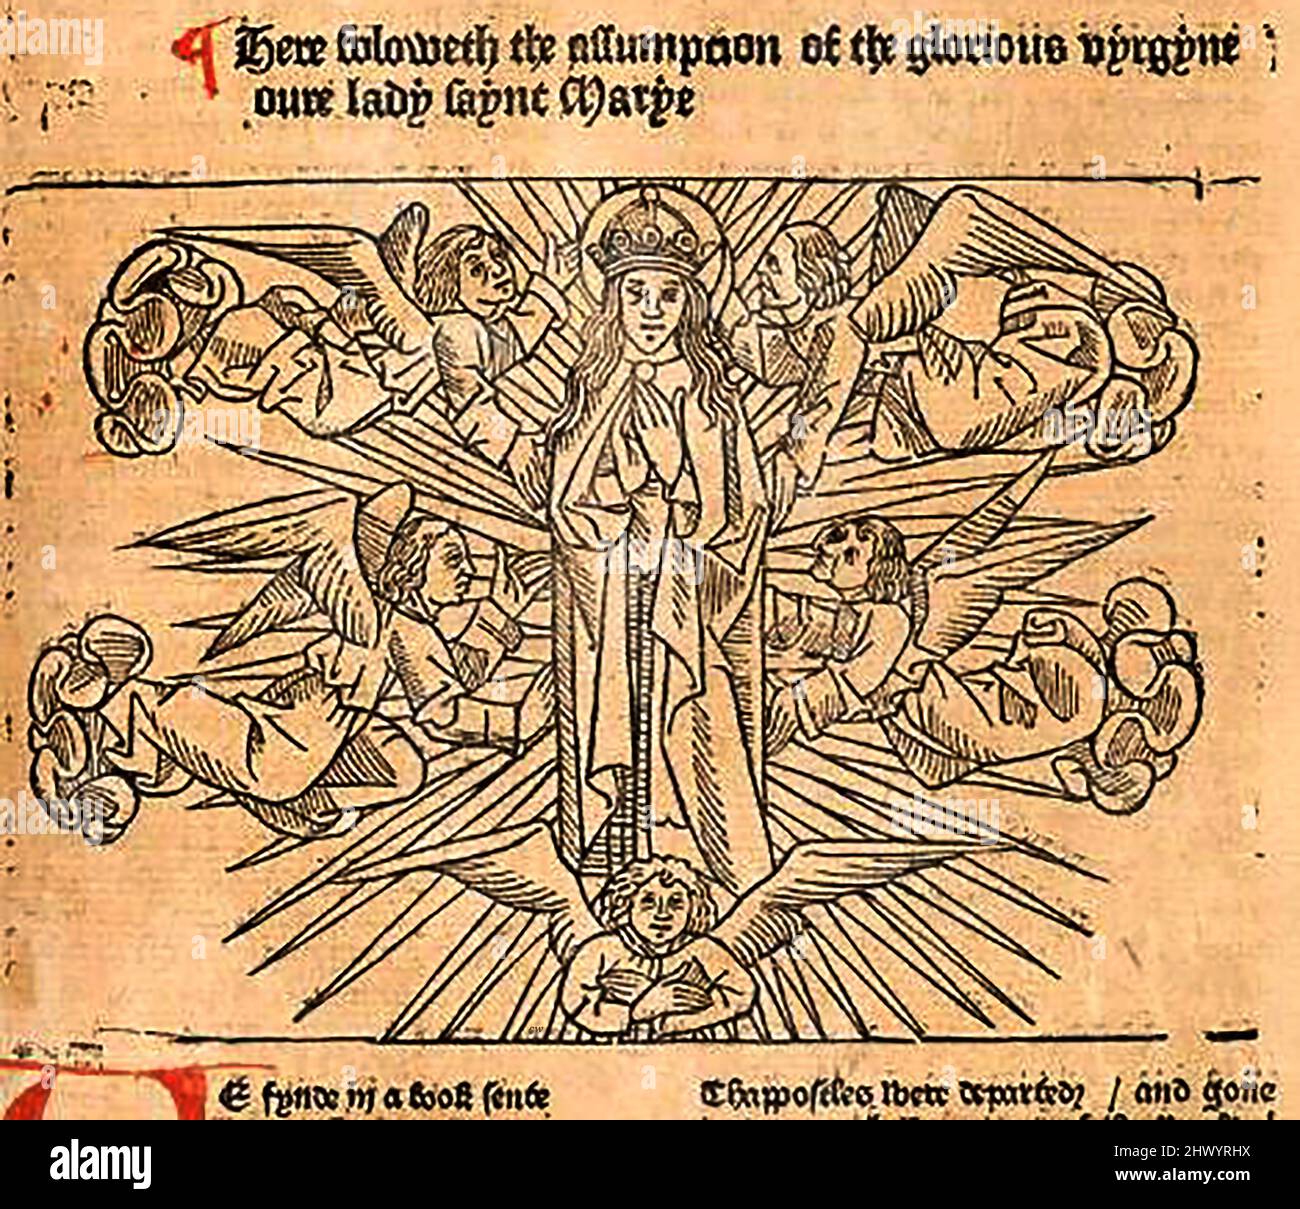 15th century woodcut showing the assumption of St Mary (Virgin Mary) printed by William Caxton ( 1422-1491/92) in his translation of  'The Golden Legend' or  'Thus endeth the legende named in Latyn legenda aurea that is to saye in Englysshe the golden legende' by Jacobus, de Voragine, (Circa 1229-1298). Stock Photo